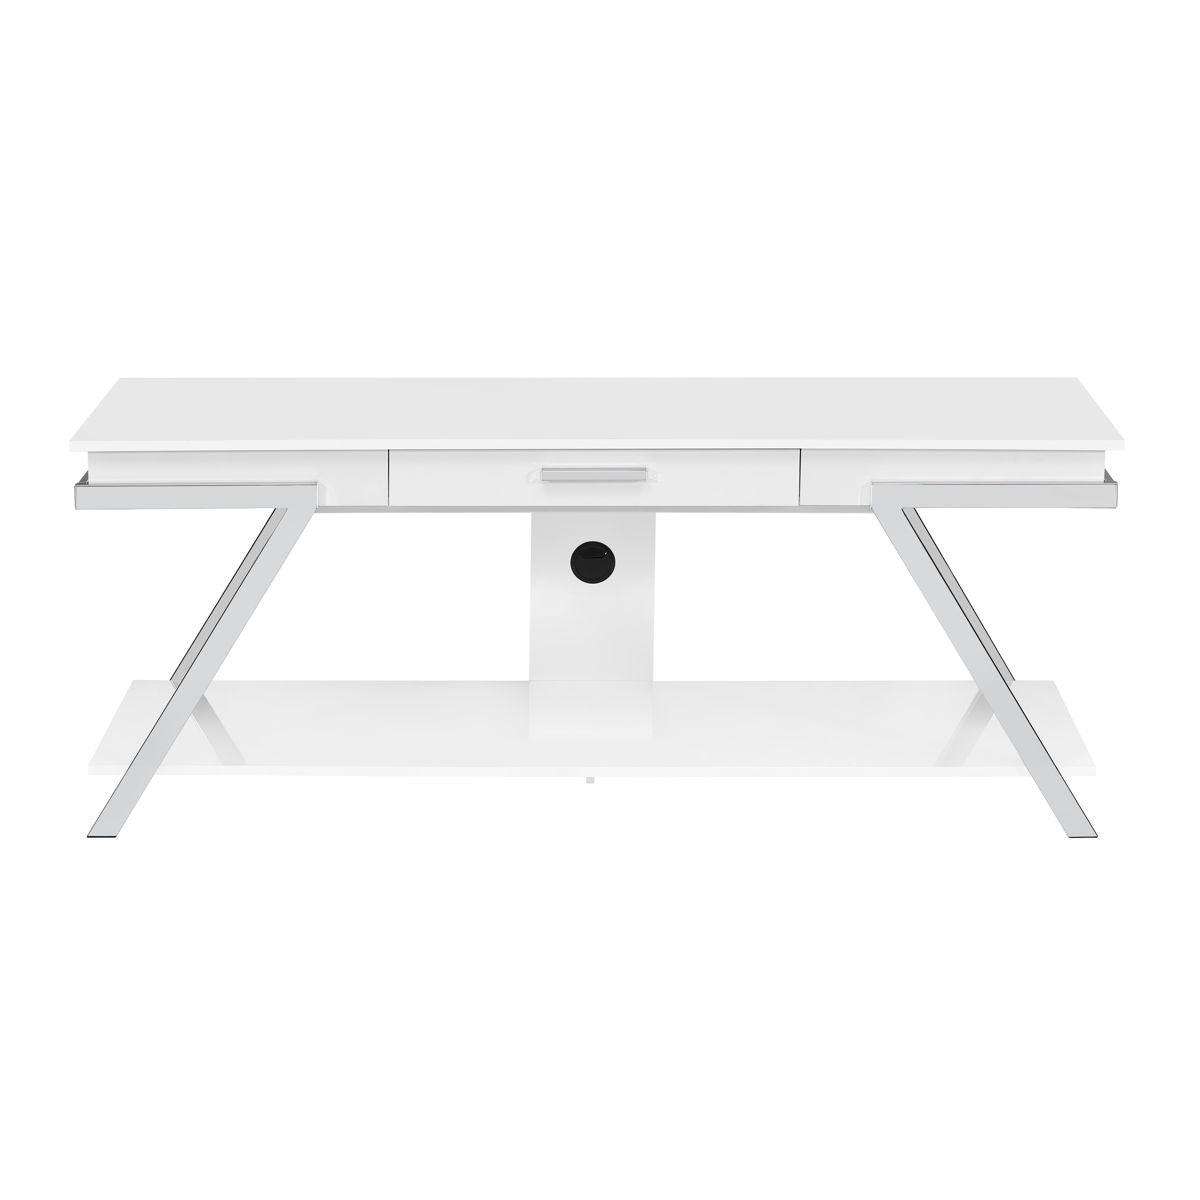 Steve Silver Furniture - Zena - TV Stand With Drawer - White - 5th Avenue Furniture